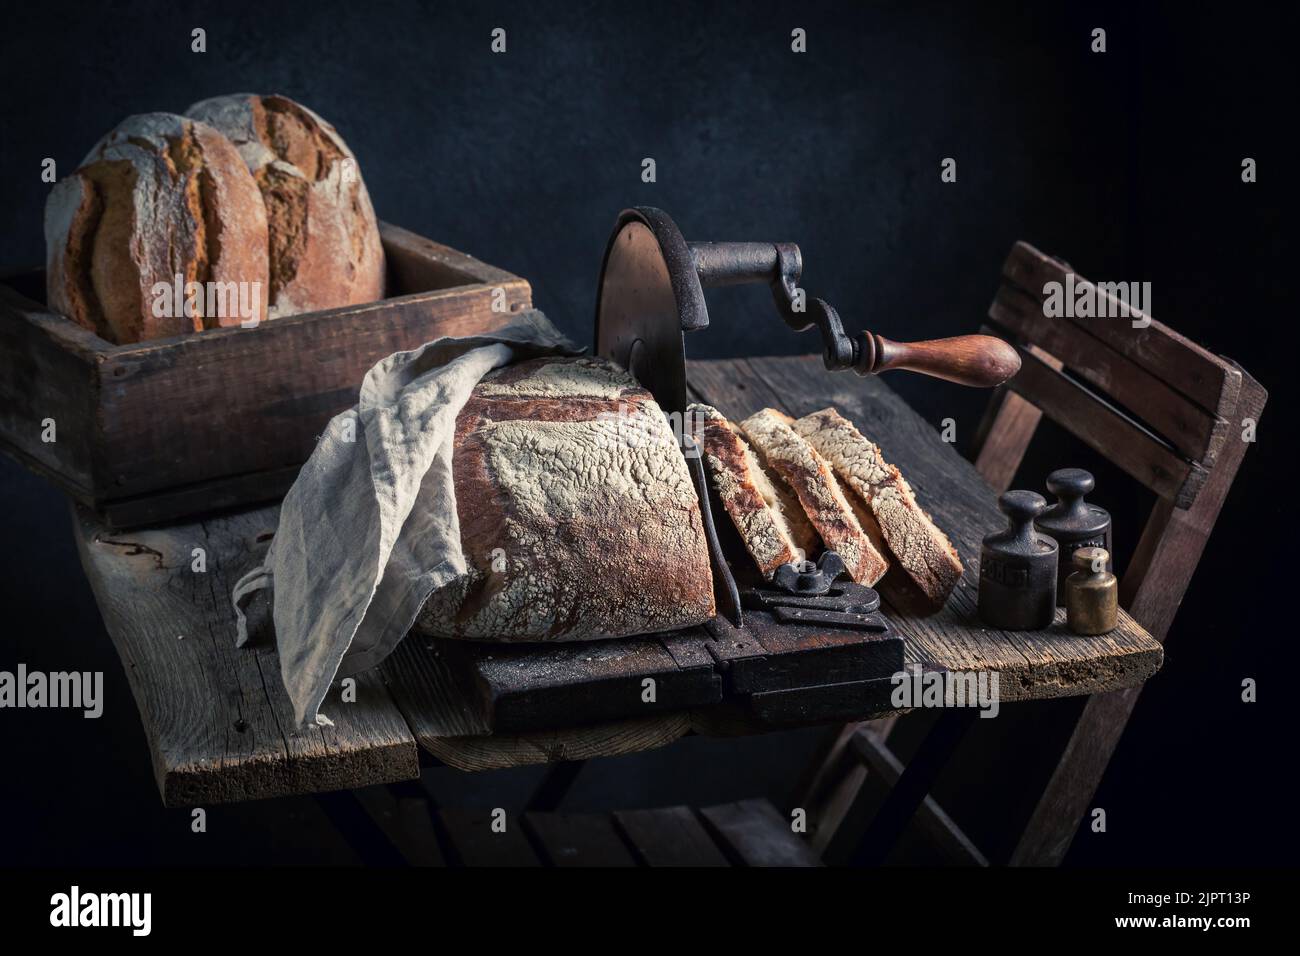 https://c8.alamy.com/comp/2JPT13P/homemade-and-rustic-loaf-of-bread-with-flour-and-crumbs-a-loaf-of-bread-on-a-crumb-slicer-2JPT13P.jpg